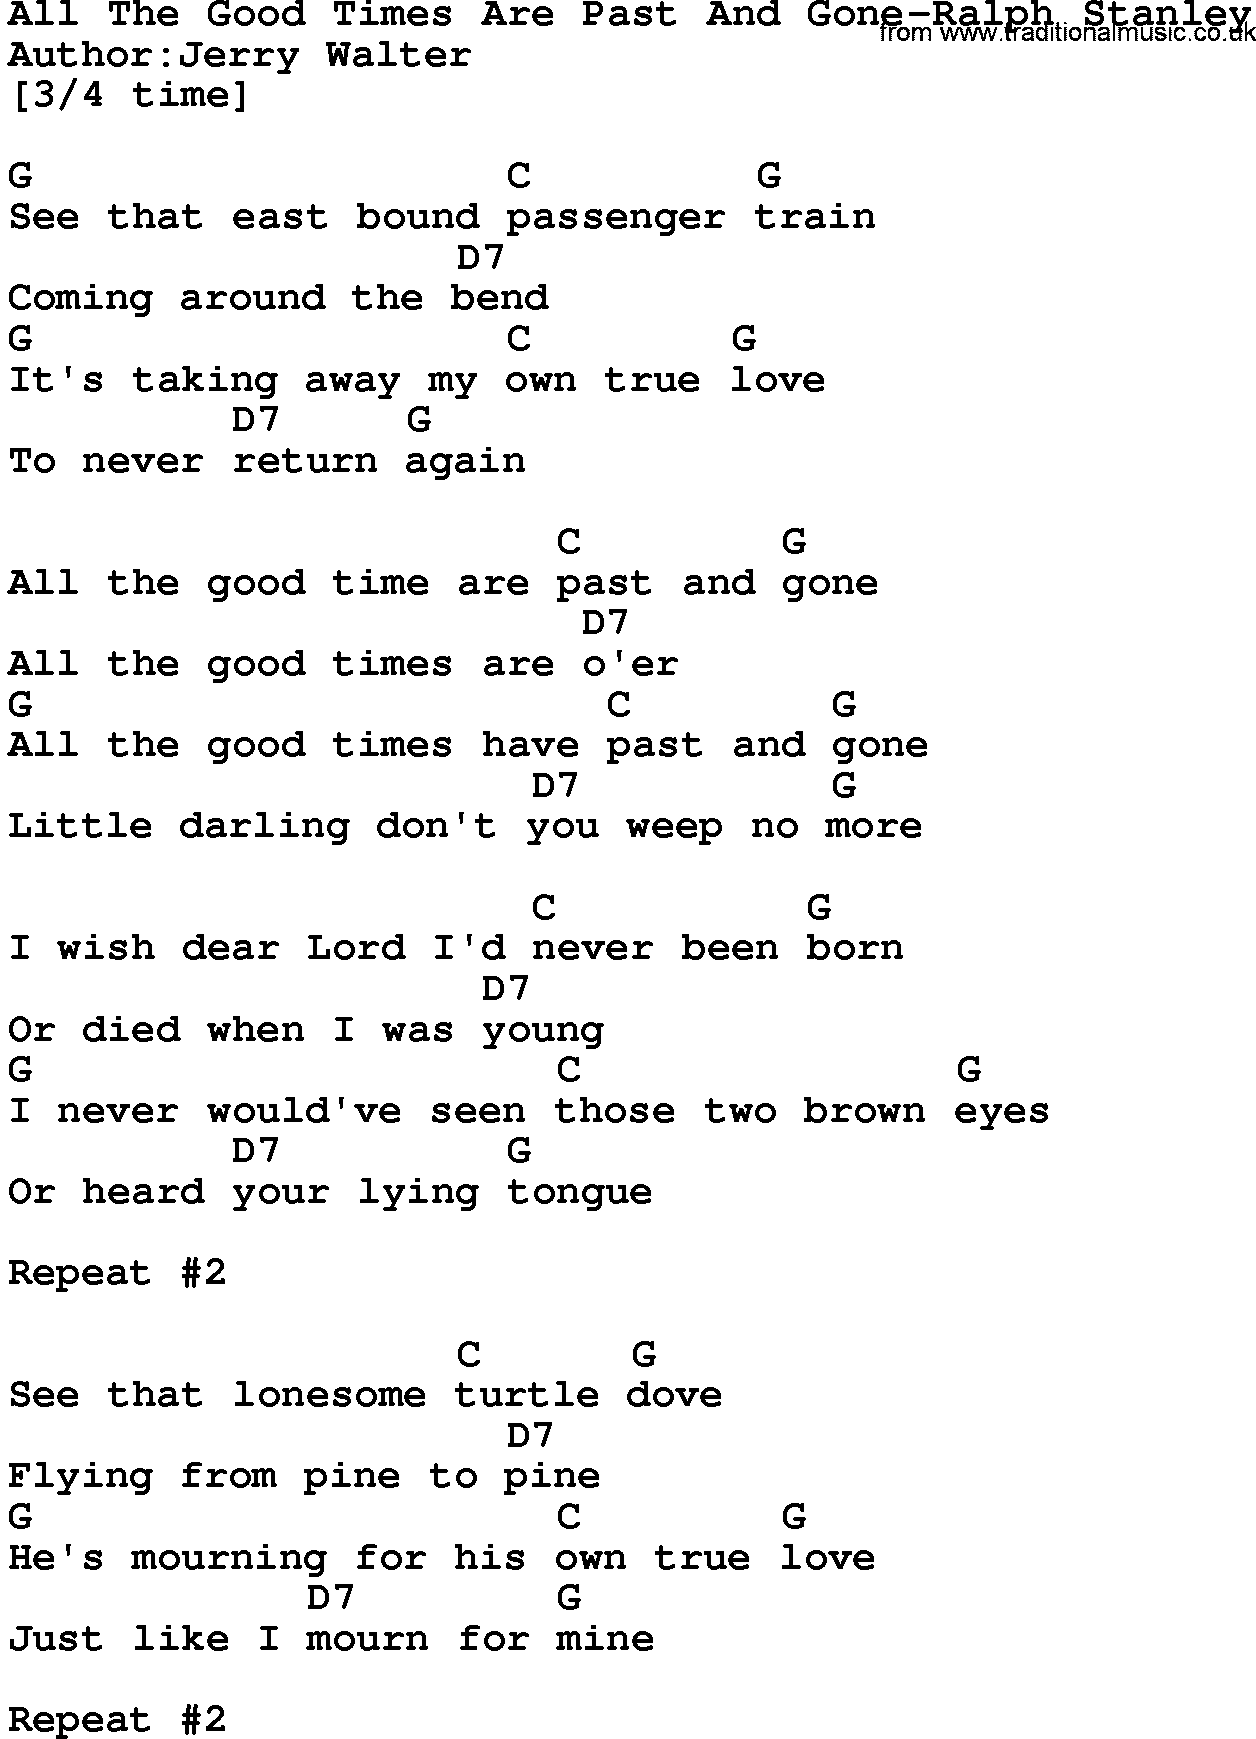 Country music song: All The Good Times Are Past And Gone-Ralph Stanley lyrics and chords